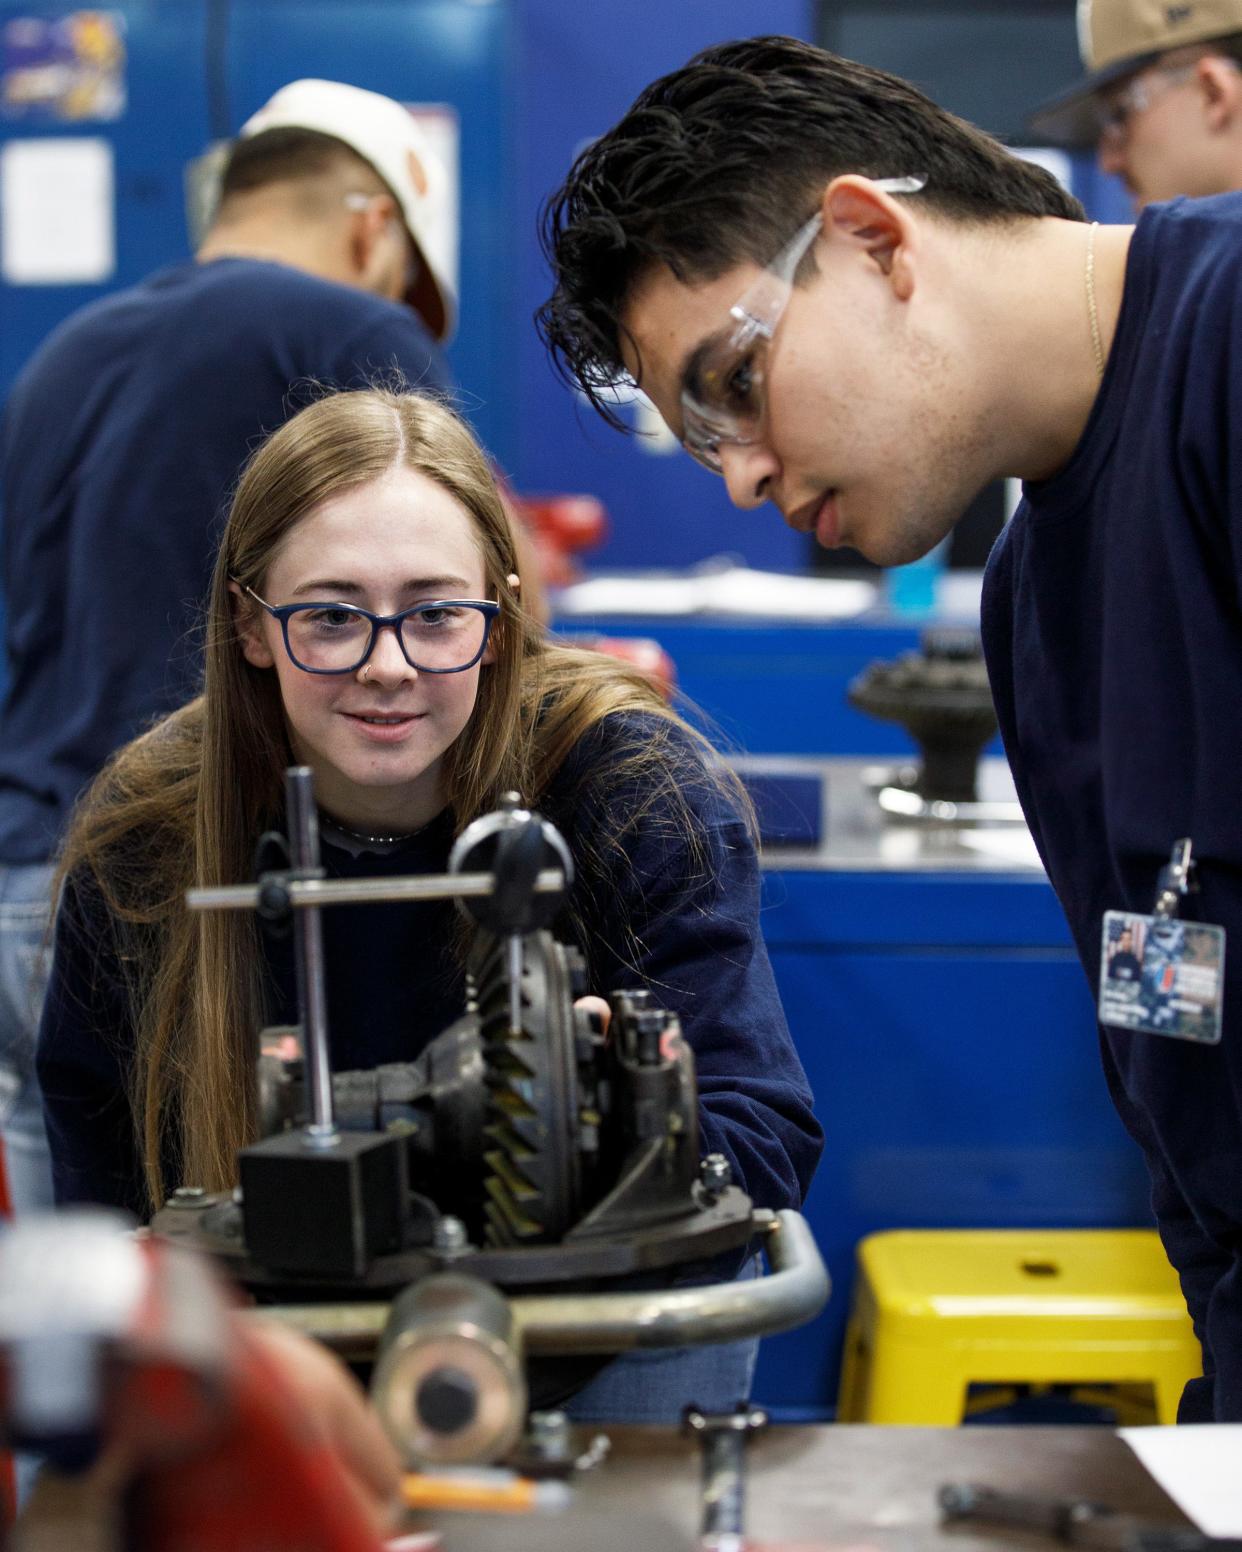 Ford dealers and Ford Fund, the philanthropic arm of Ford Motor Company, are investing $2 million in scholarship funding in 10 regions to help students pursue careers as automotive technicians